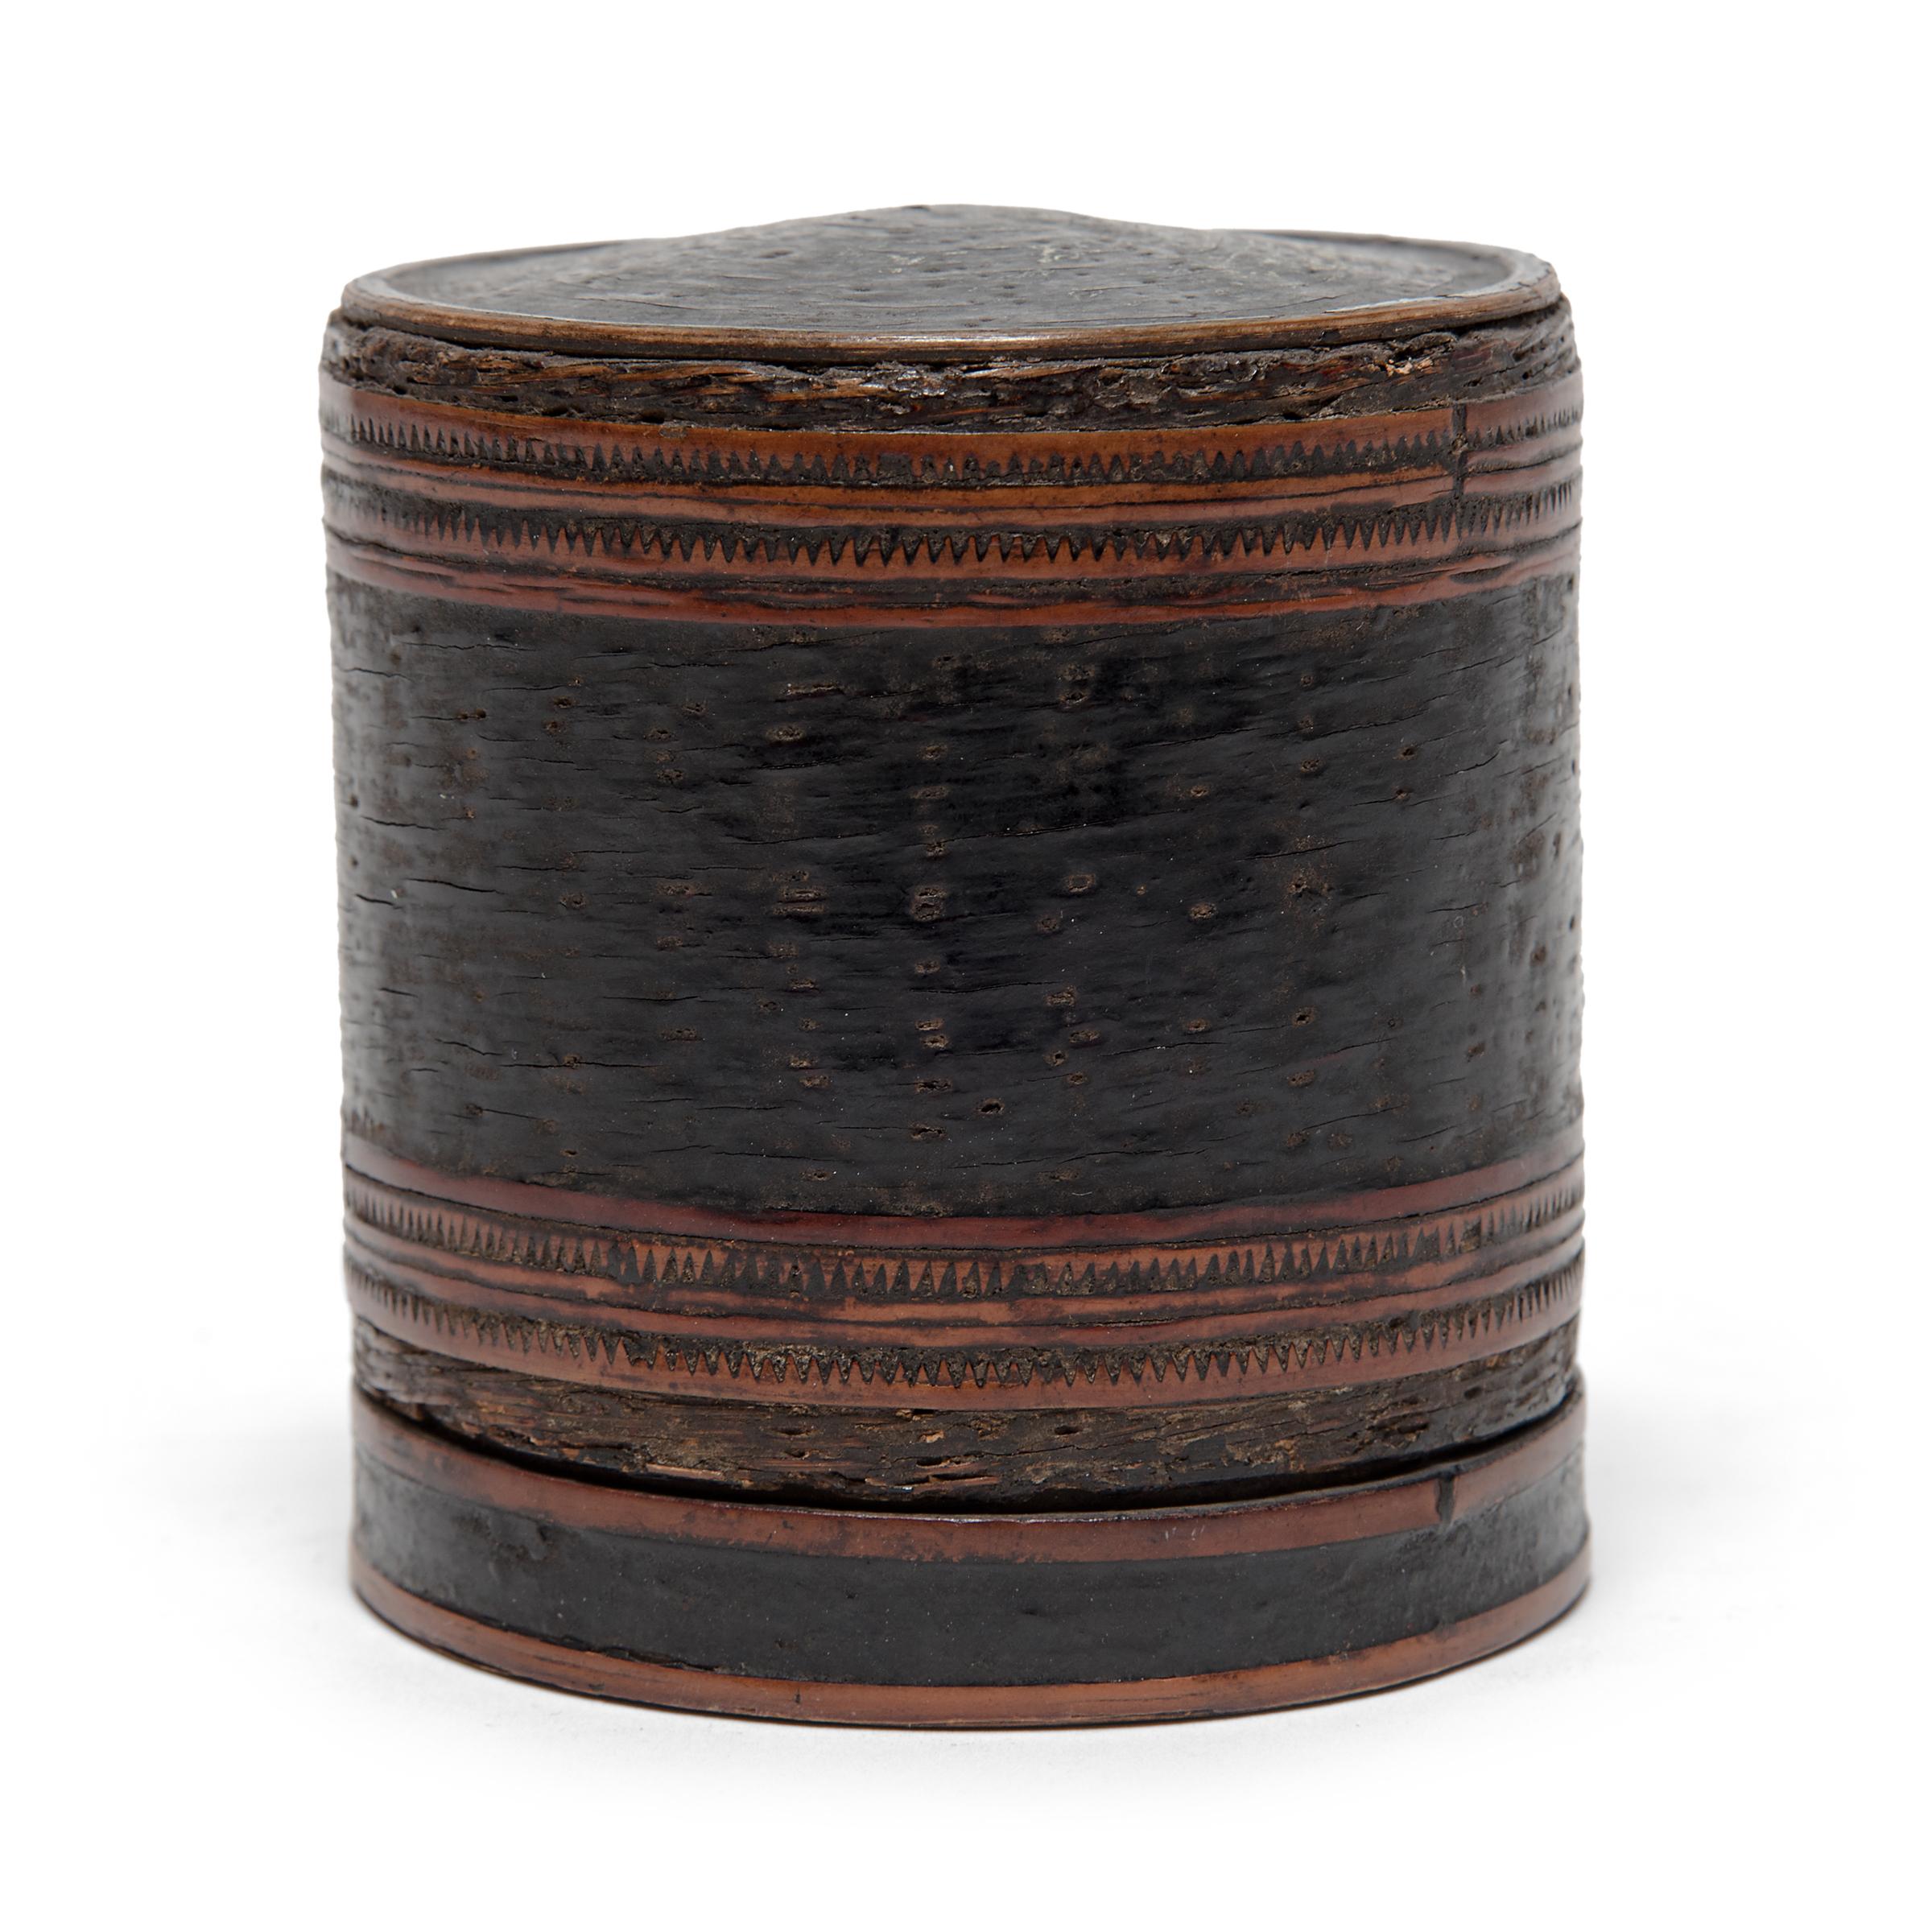 In many Southeast Asian cultures, offering guests a betel quid to chew was the fundamental symbol of hospitality. A blend of leaves, nuts, seasonings, and sometimes tobacco, betel was kept in finely worked and decorated boxes. This round betel box